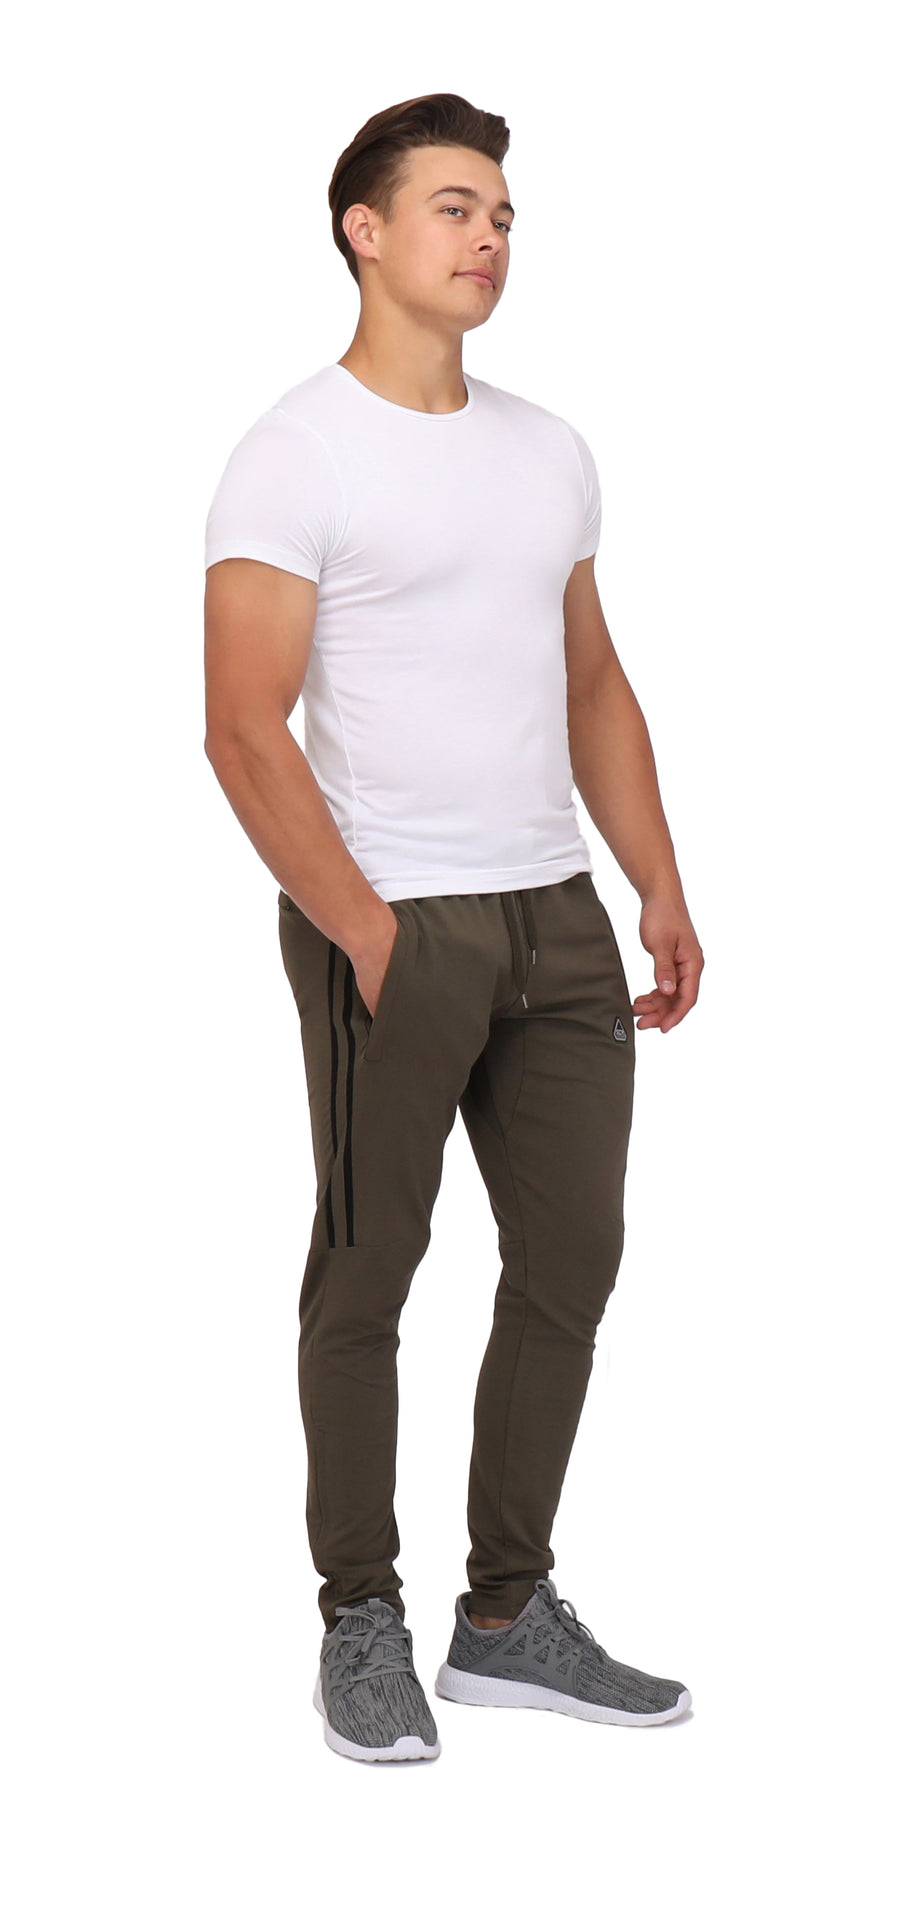 SCR Sportswear Mens Workout Pants in Mens Workout Clothing